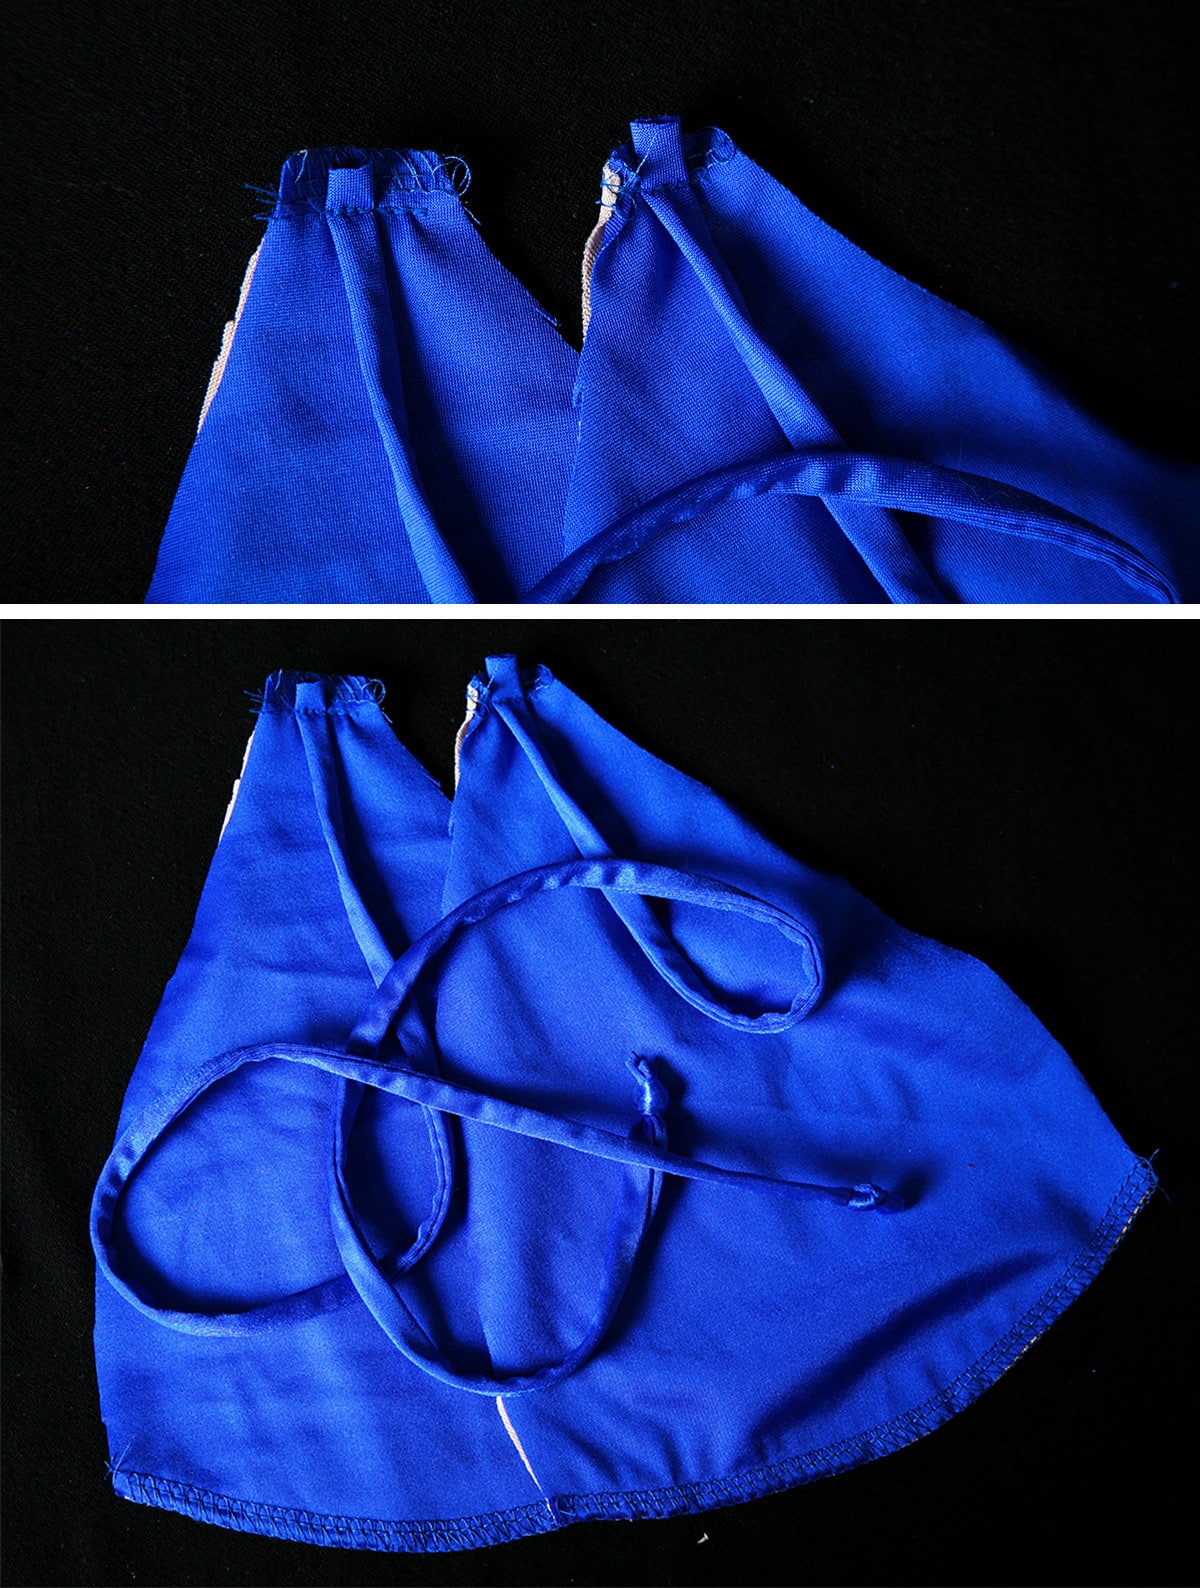 A two part image showing the short strings sewn to the top of the triangles, as described.